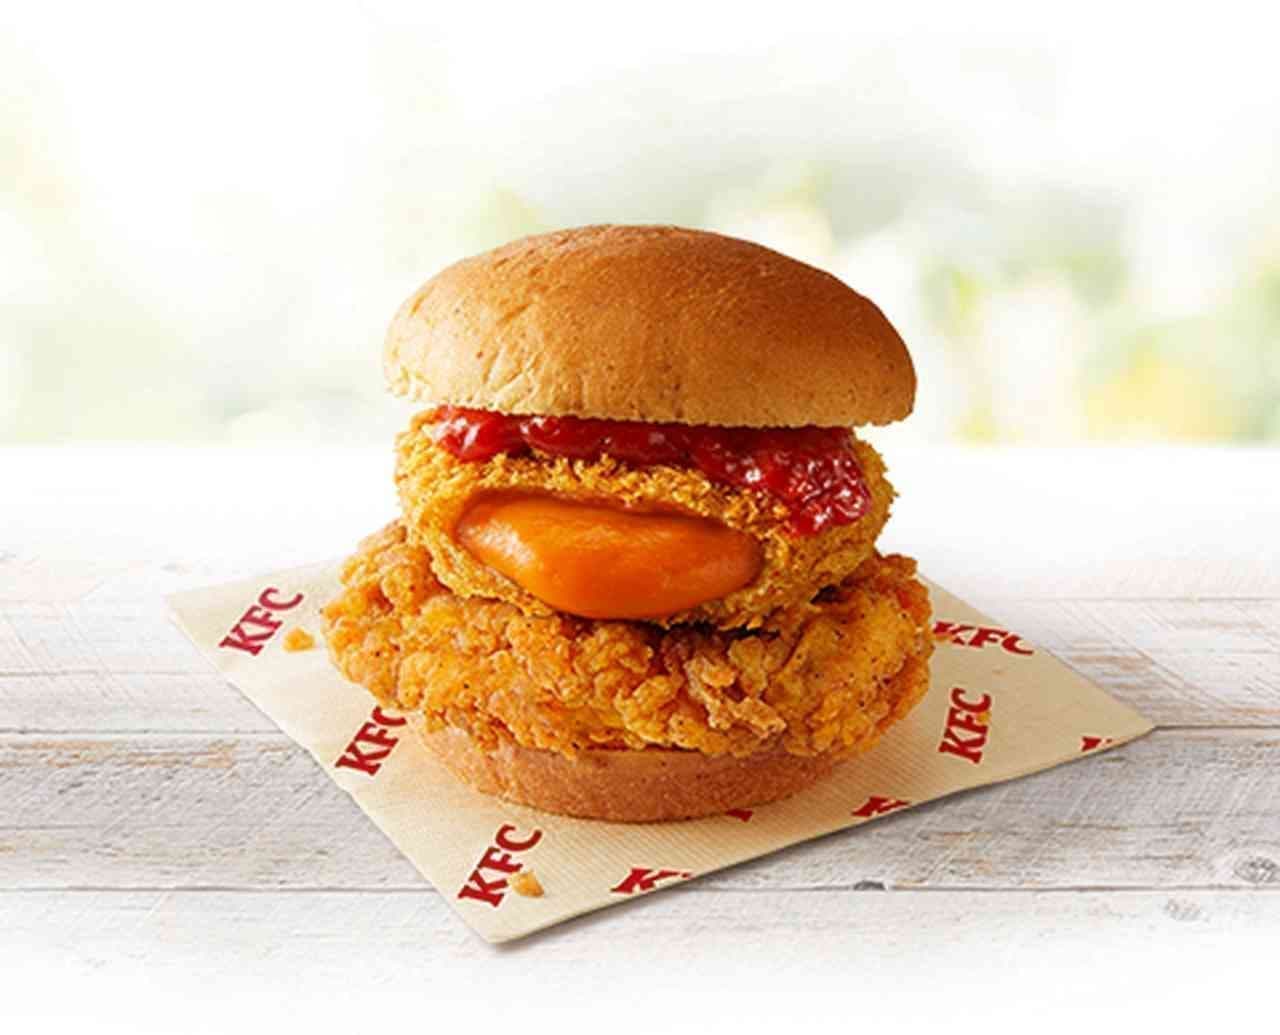 Kentucky New Product: "Lobster Fillet Burger with Spreading Taste of Lobster